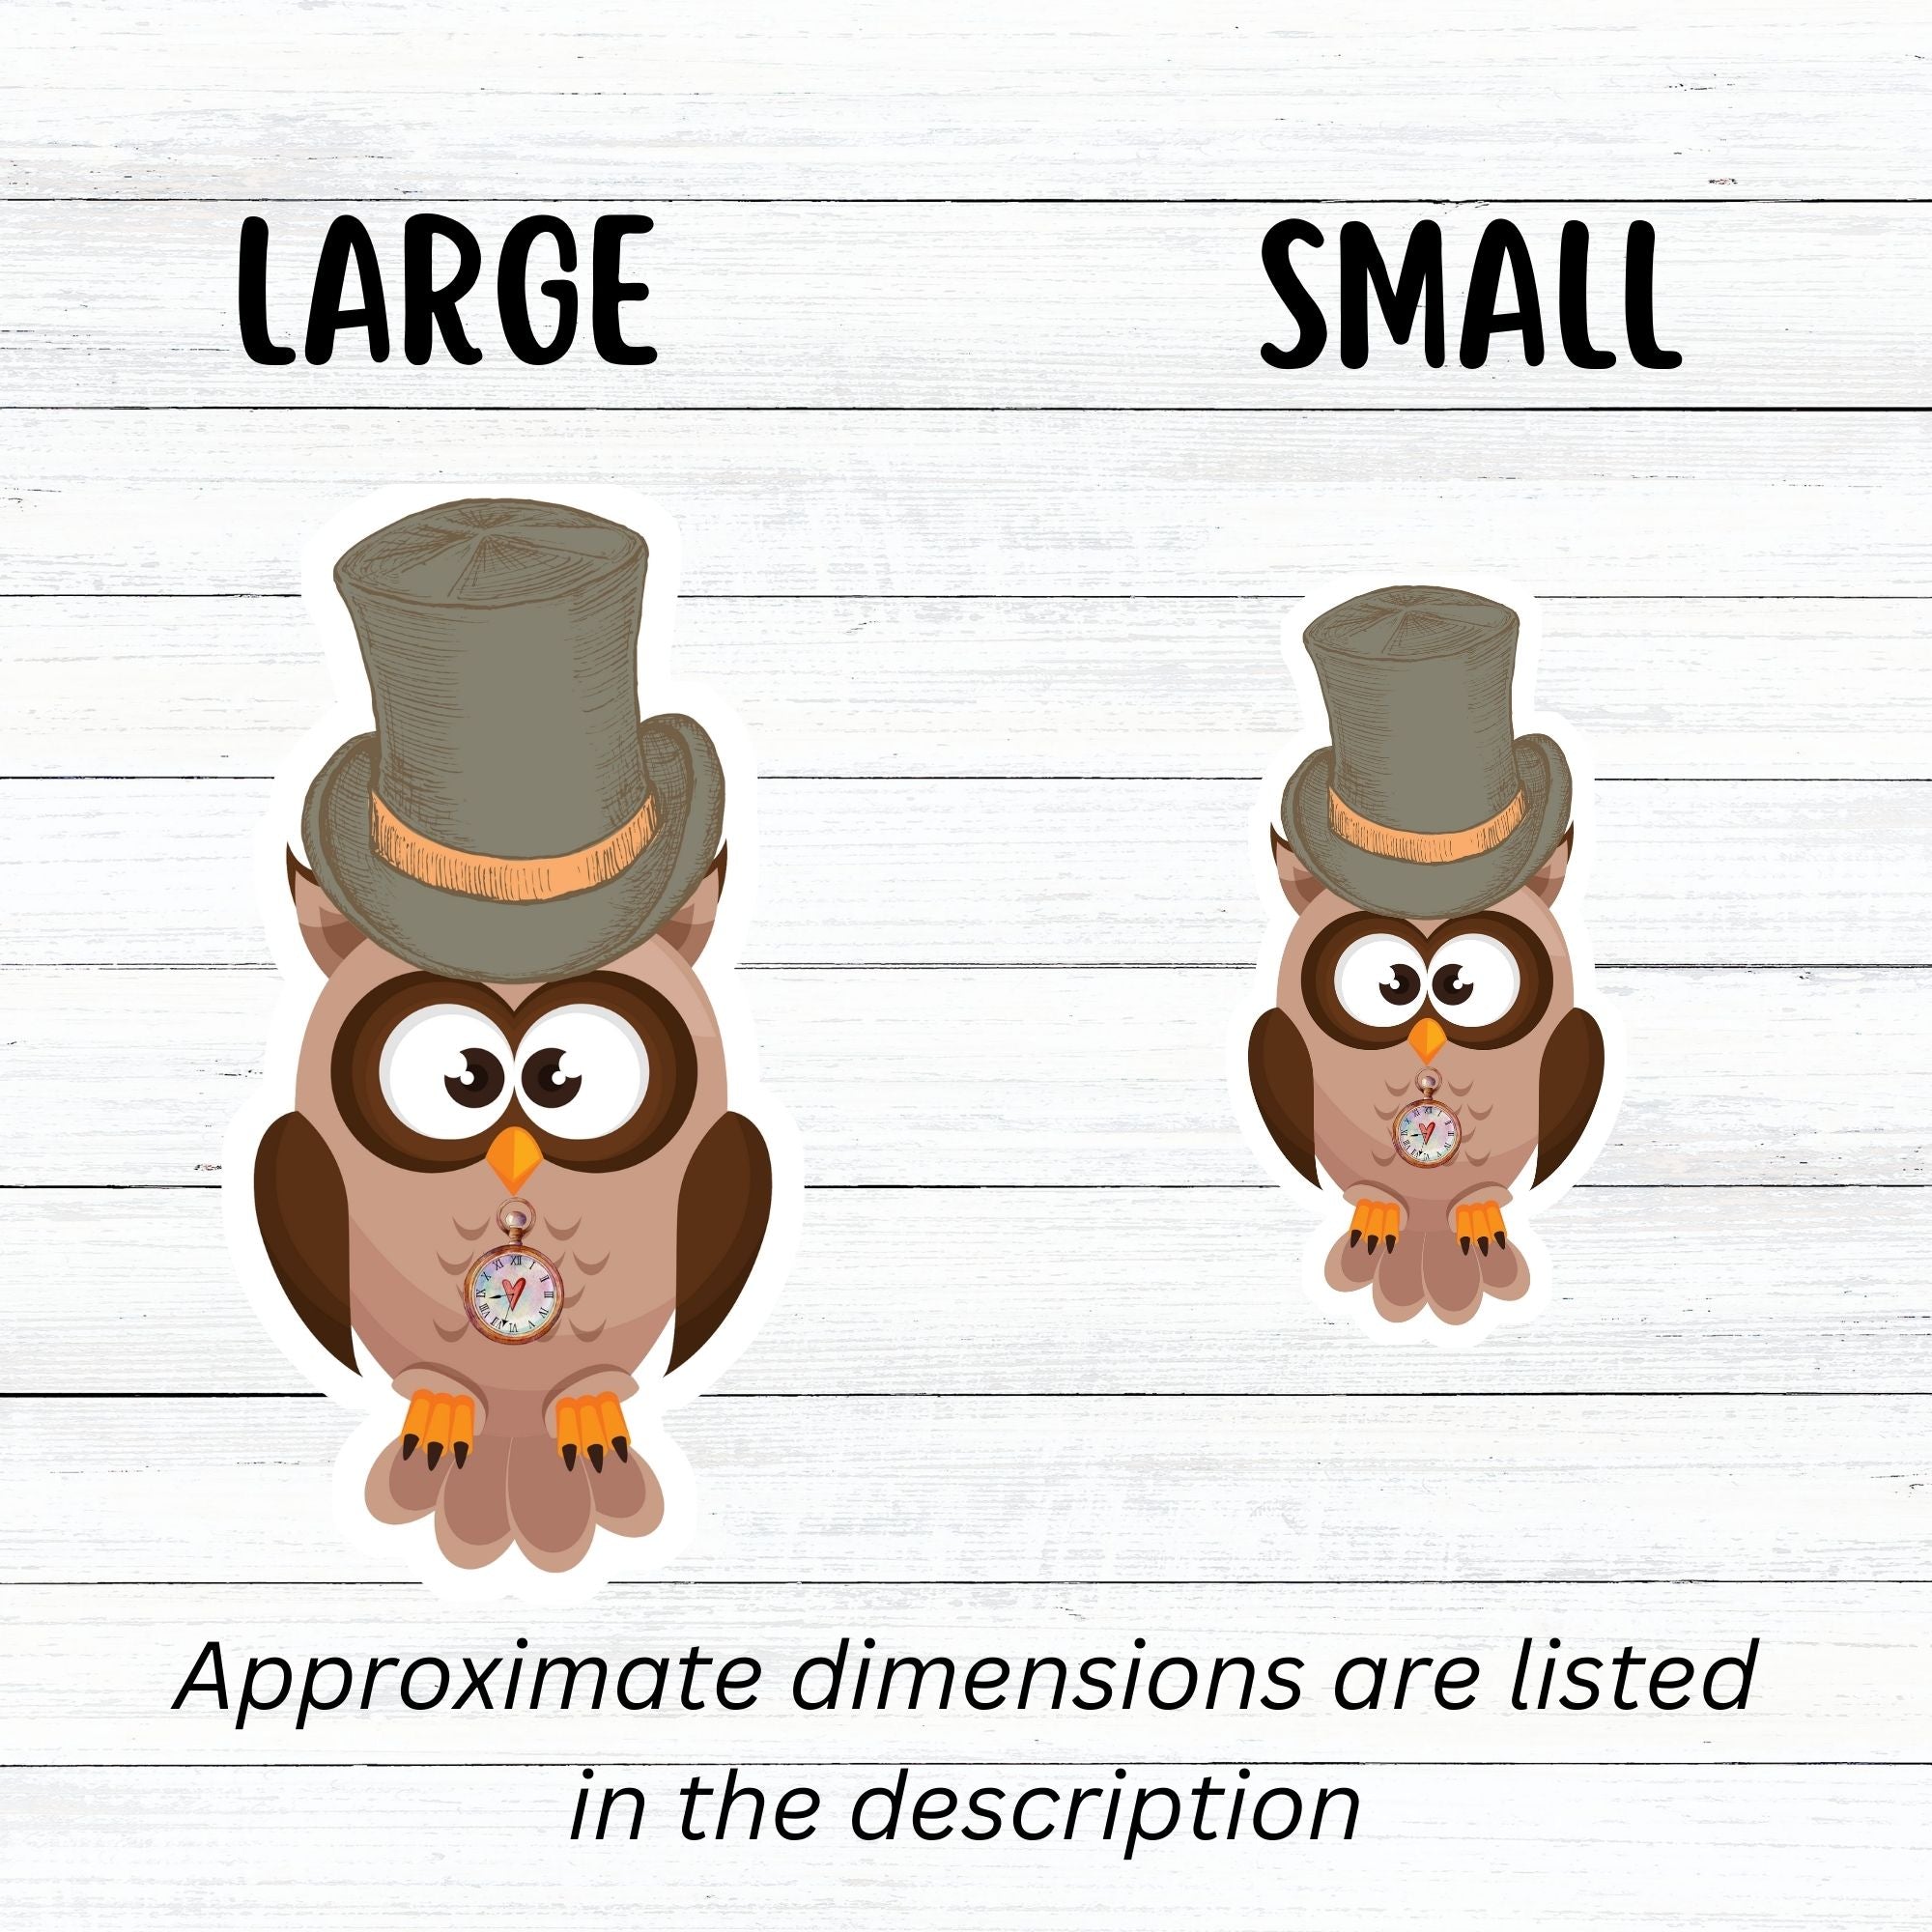 Mr. Owl is a distinguished looking steampunk owl with top hat and a pocket watch medallion. This image shows the large and small Mr. Owl stickers next to each other.